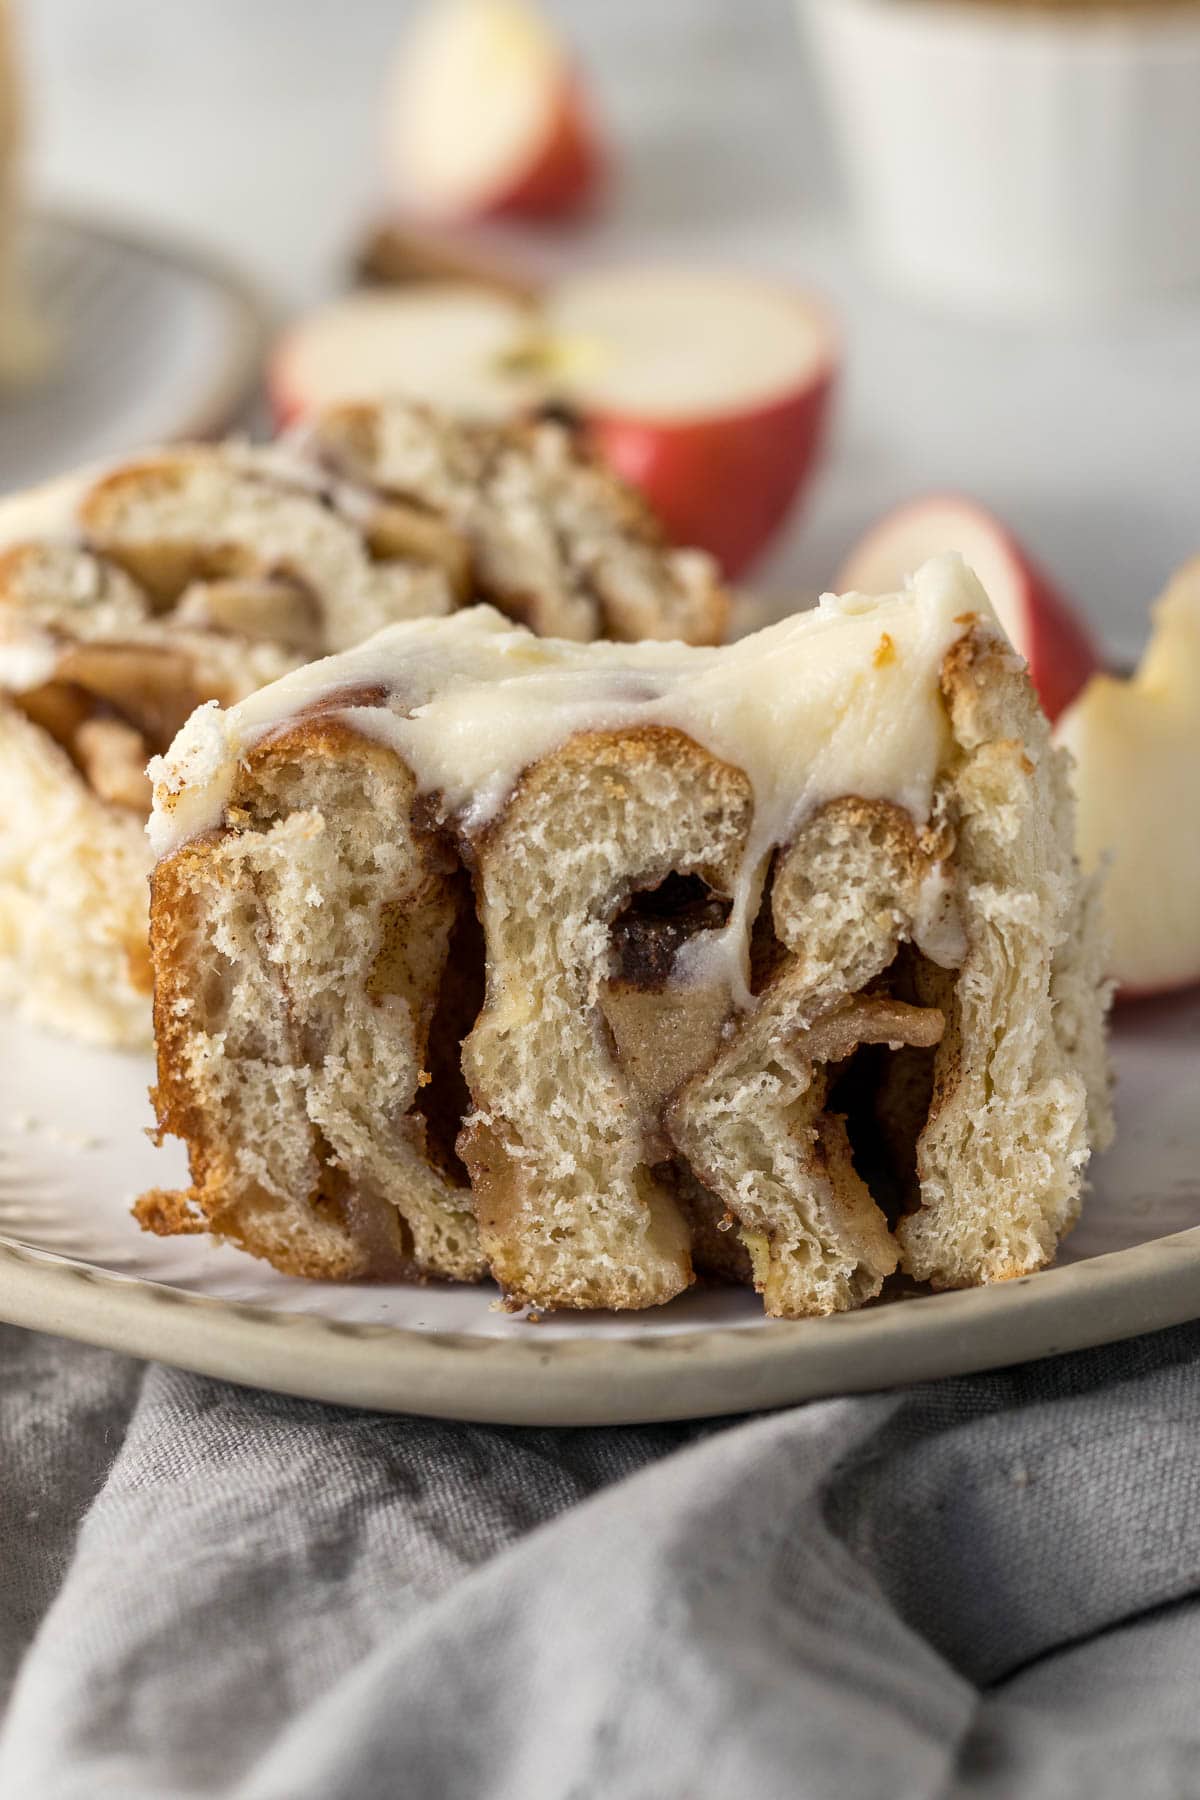 Cinnamon roll with apple pie filling sliced in half.